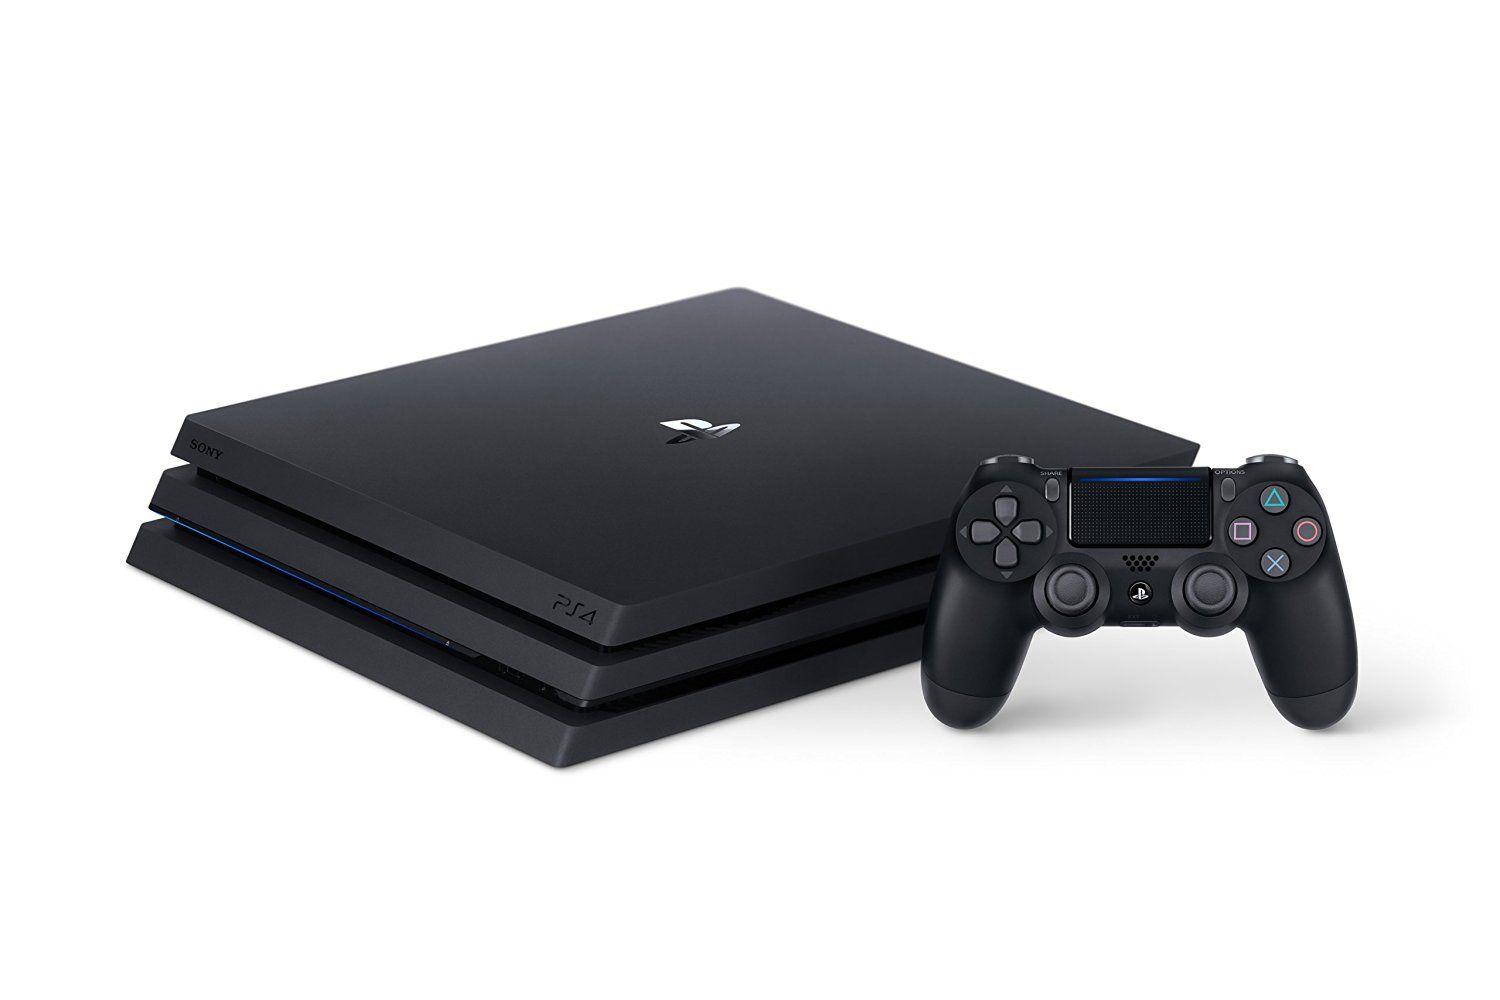 Playstation - Playstation 4 Pro HD wallpaper and background